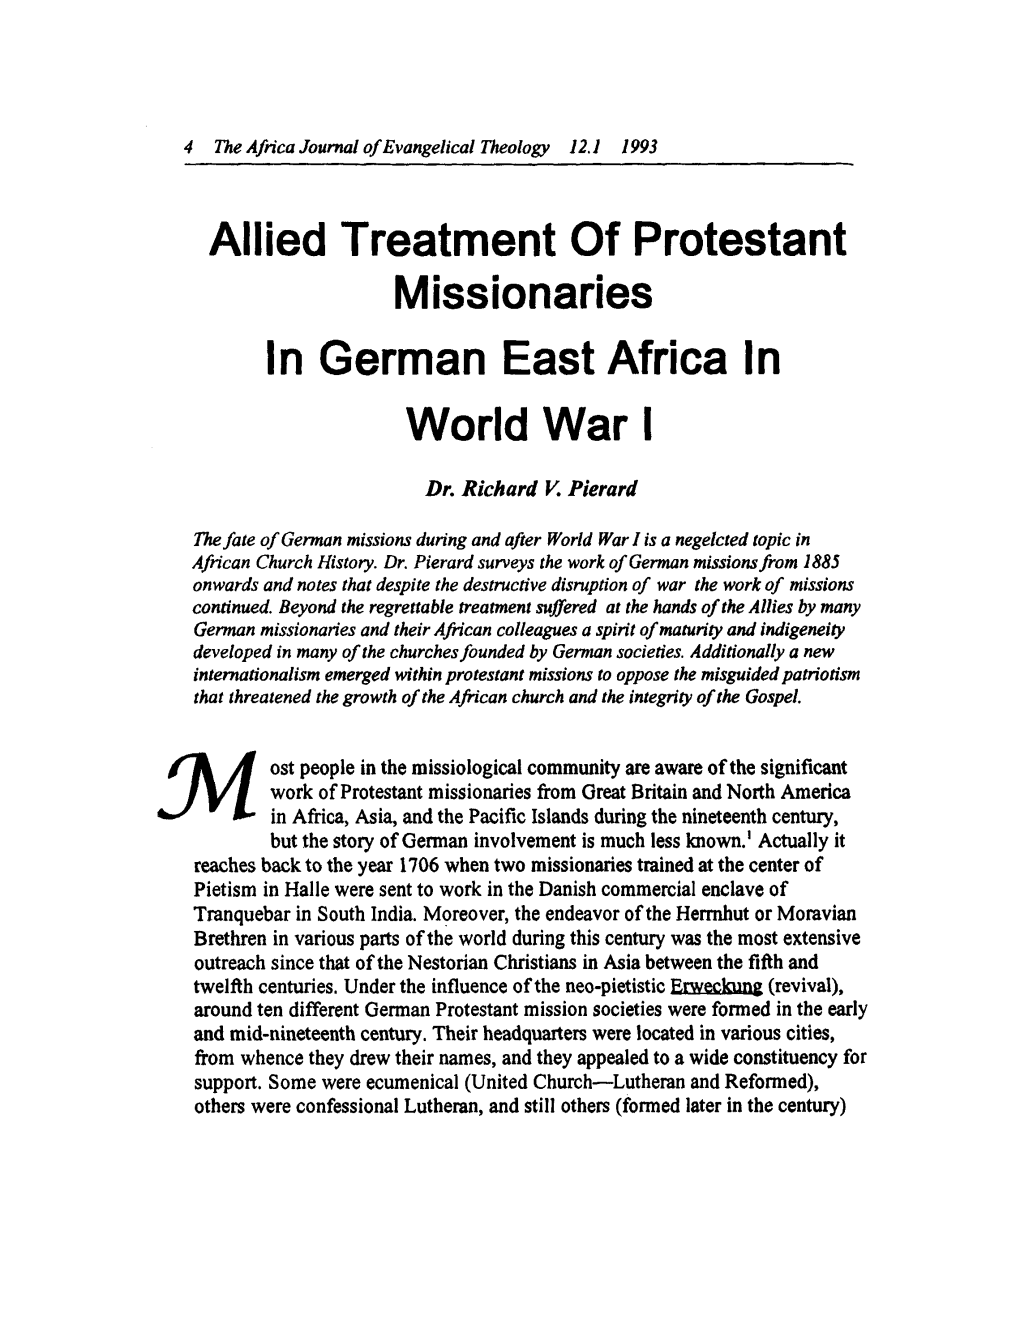 Allied Treatment of Protestant Missionaries in German East Africa in World War I